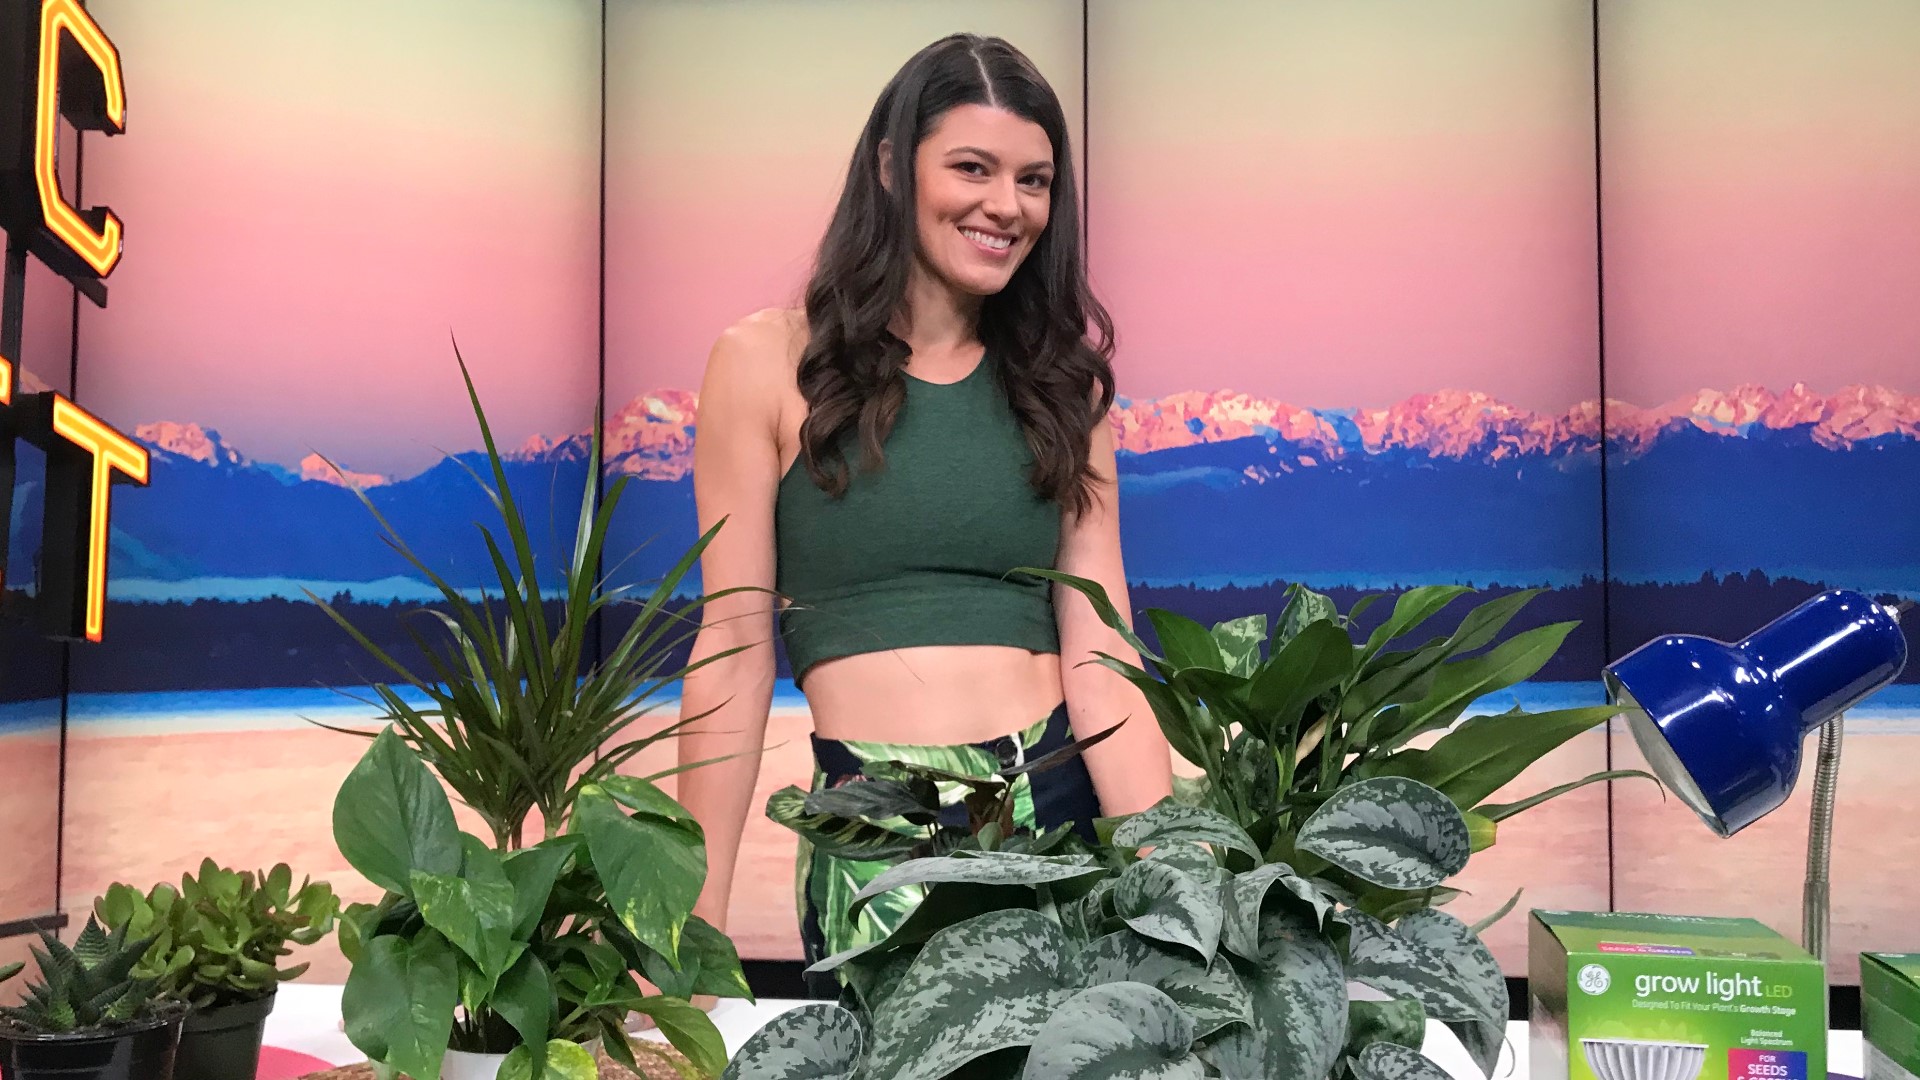 Summer Rayne Oakes' new book teaches us how to approach our relationship with plants so that they can thrive and we can reap the psychological benefits.